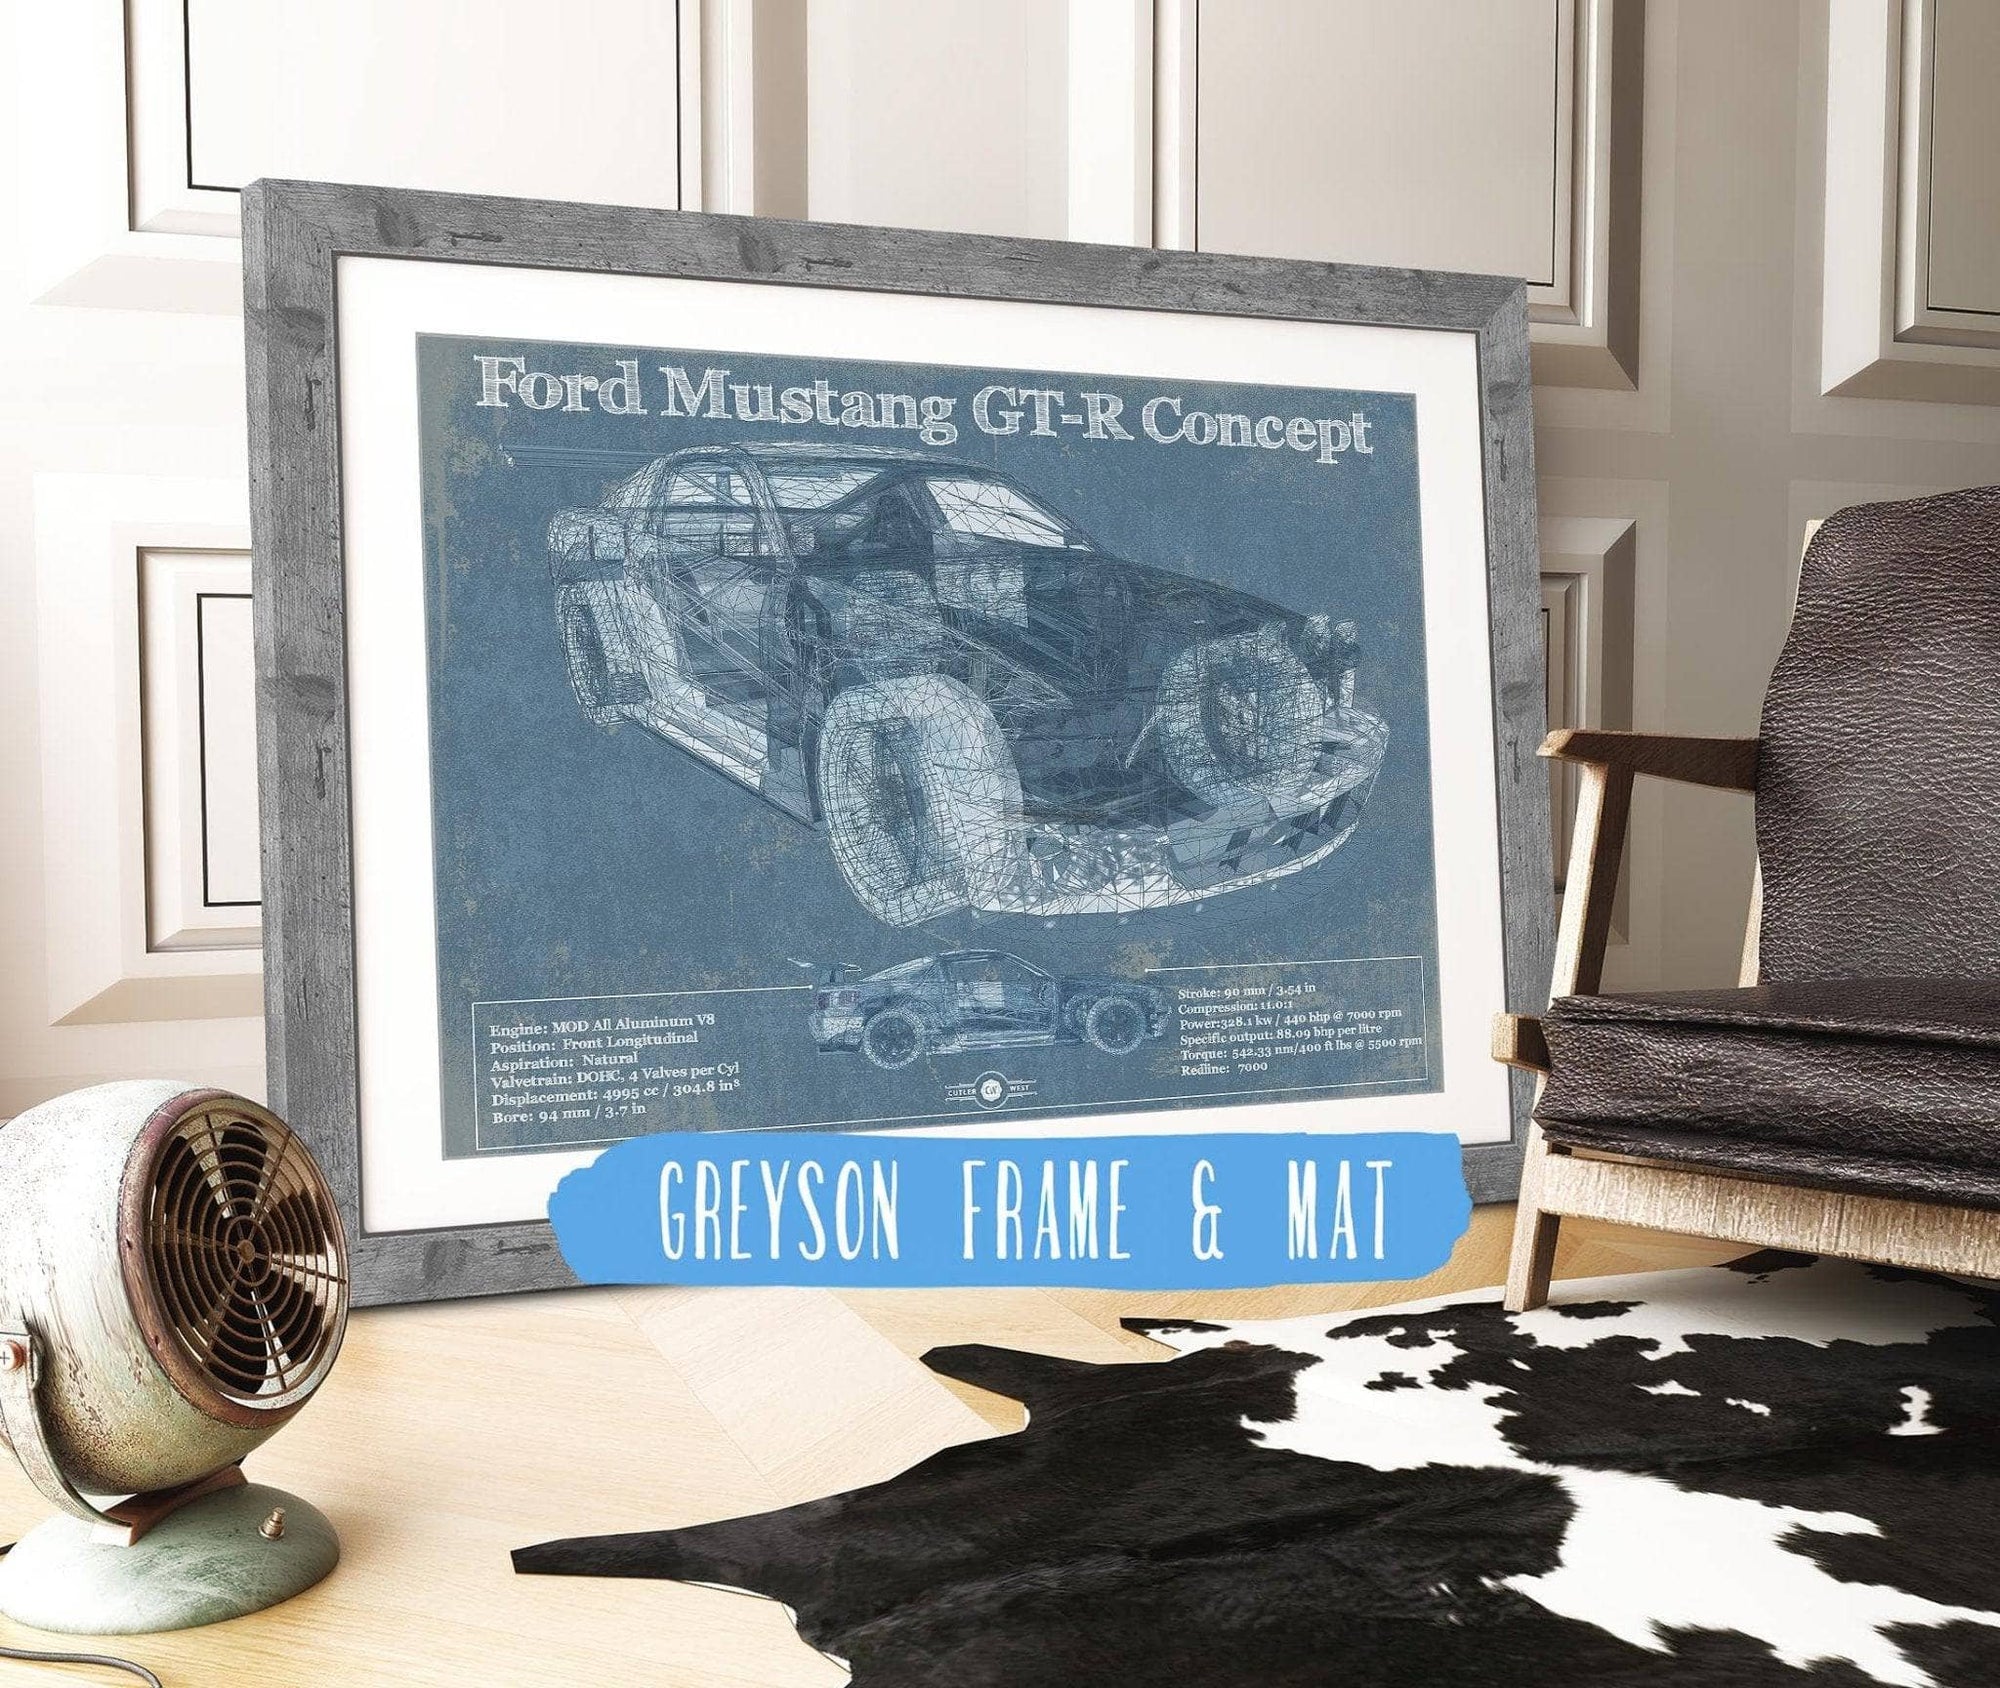 Cutler West Ford Collection 14" x 11" / Greyson Frame & Mat Ford Mustang GT-R Concept Race Car Print 787605402_21834